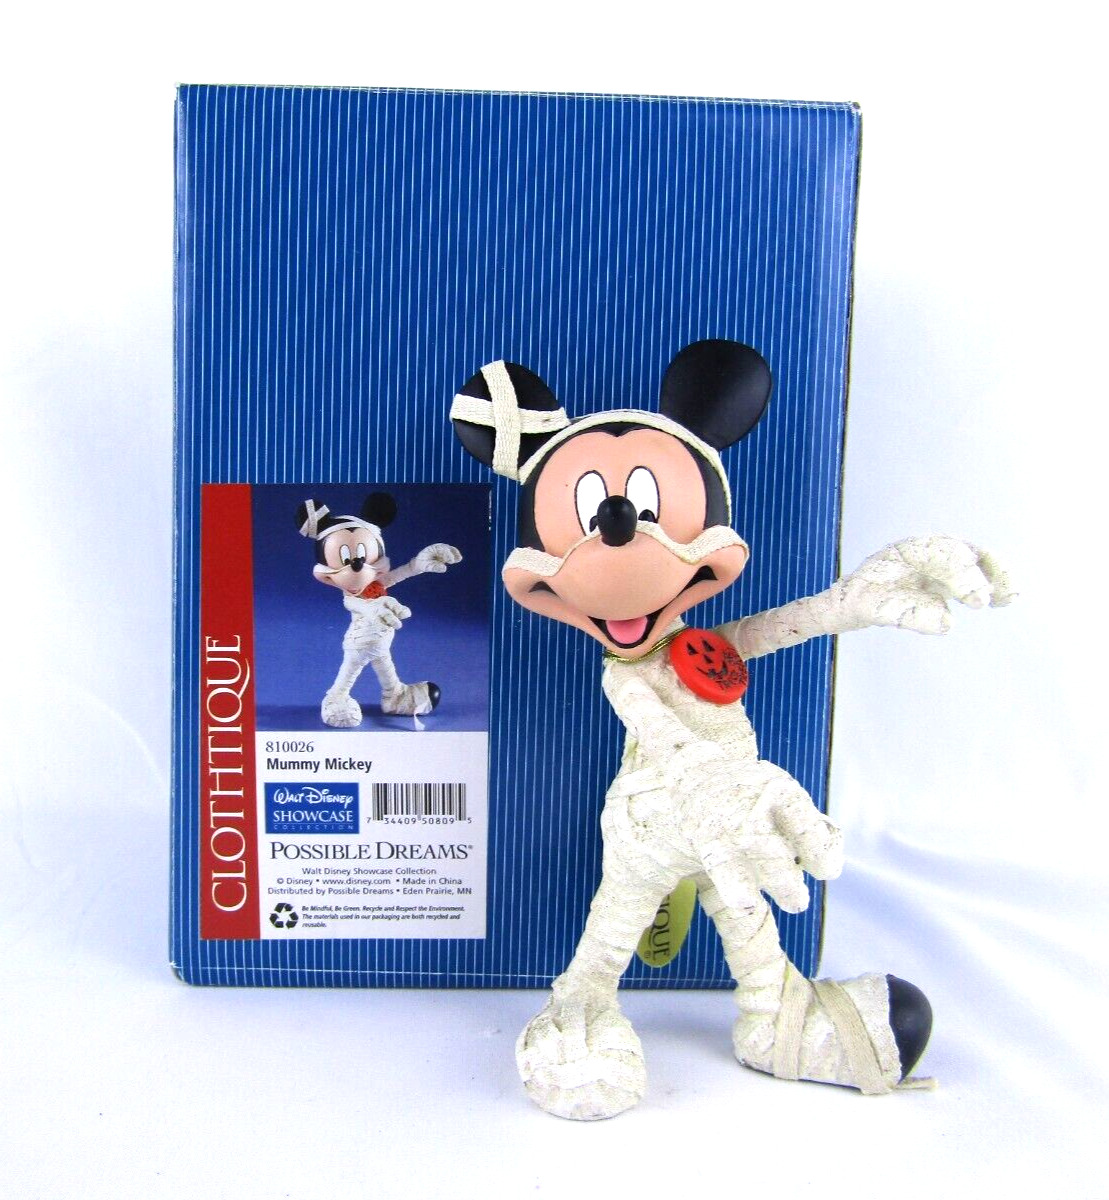 WDW Disney Mummy Mickey Clothtique Possible Dreams Showcase Collection 810026